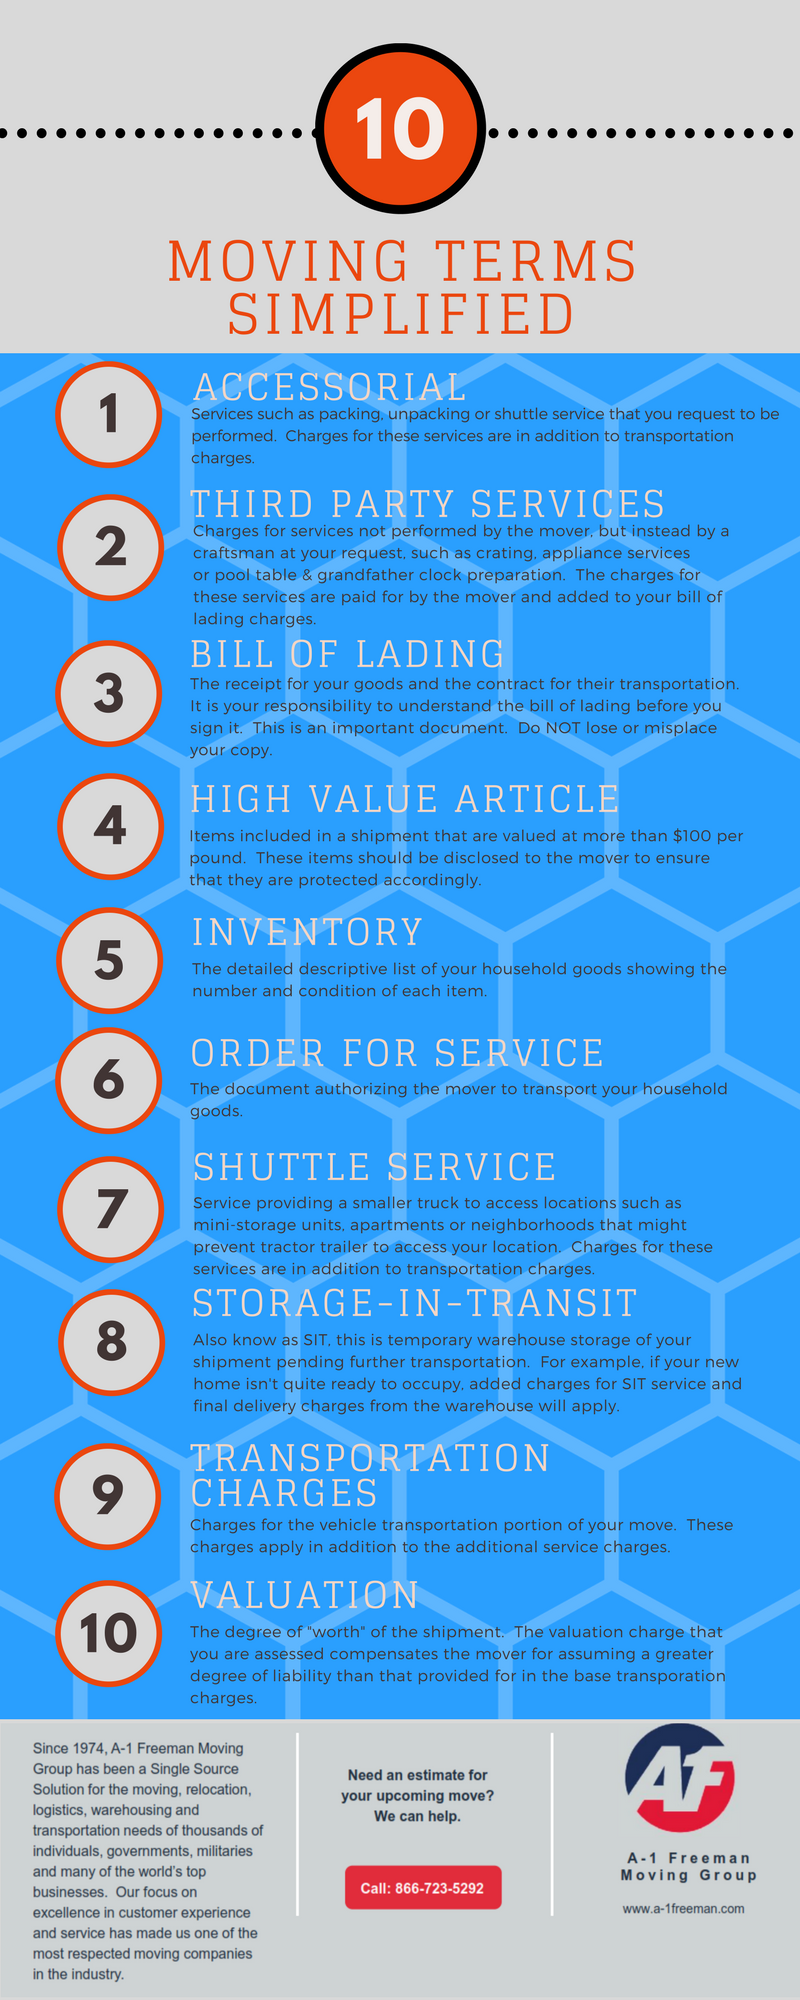 A-1 Freeman Moving Group Houston Moving Terms Infographic